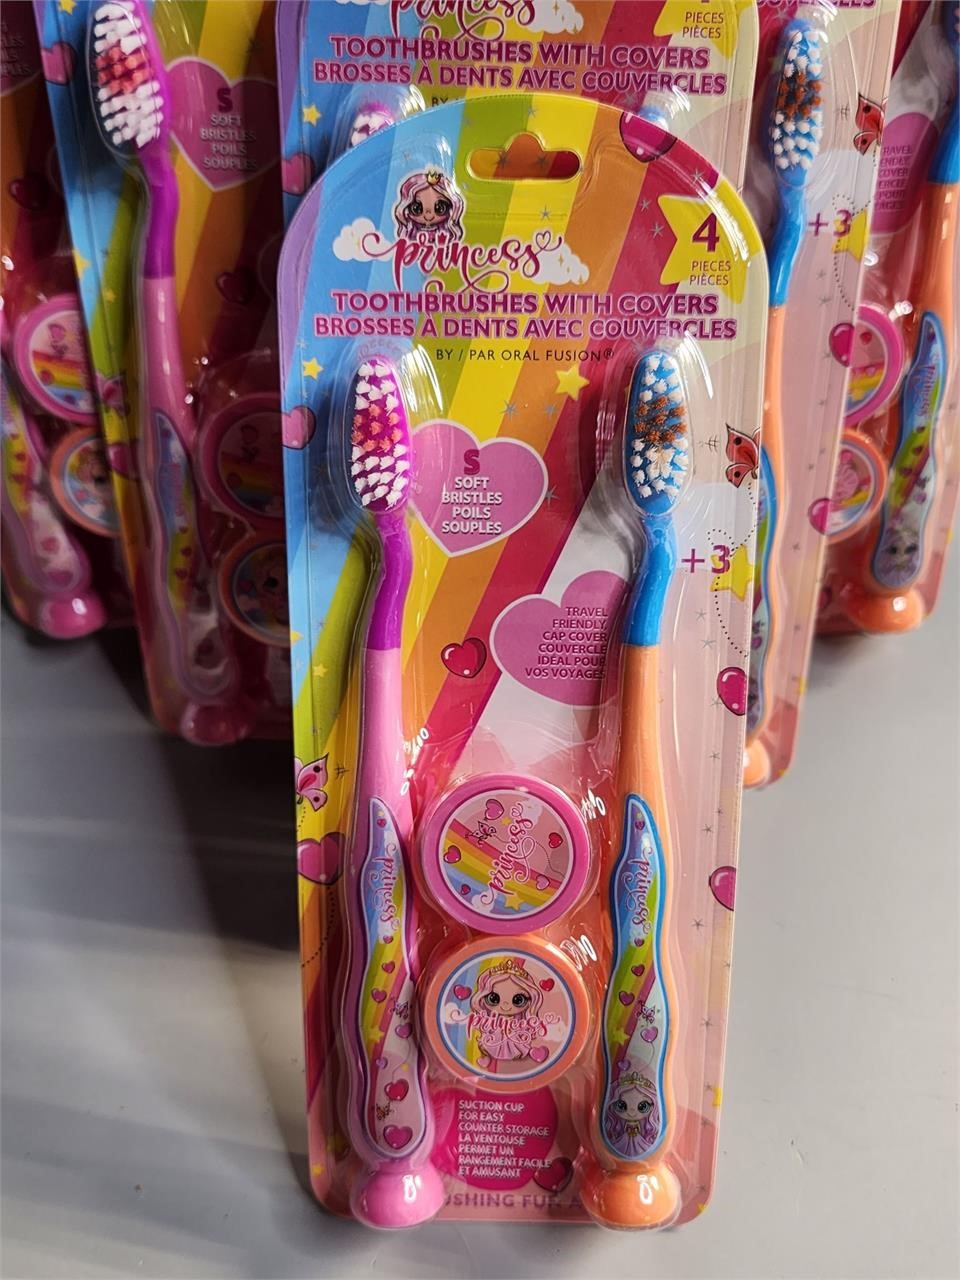 7 Brand new toothbrush sets